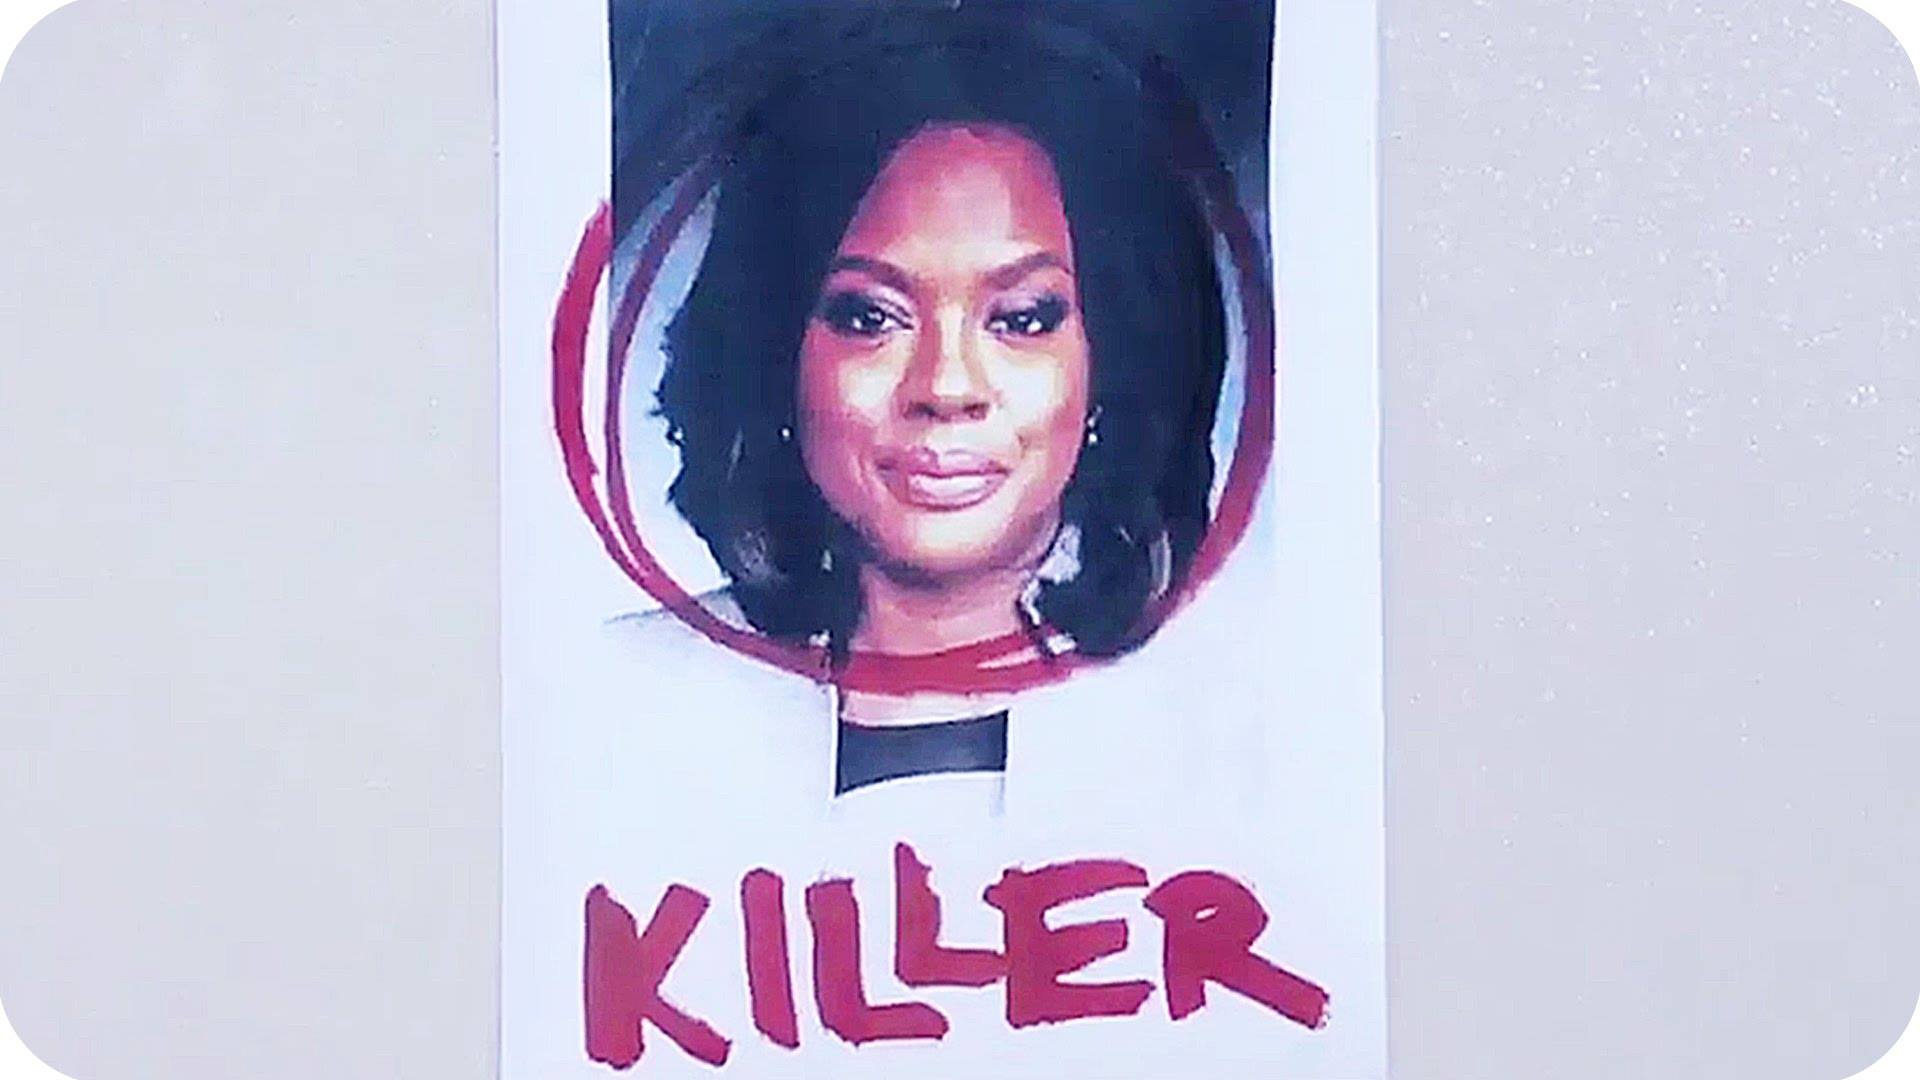 How To Get Away With Murder 3×02 – There Are Worse Things Than Murder